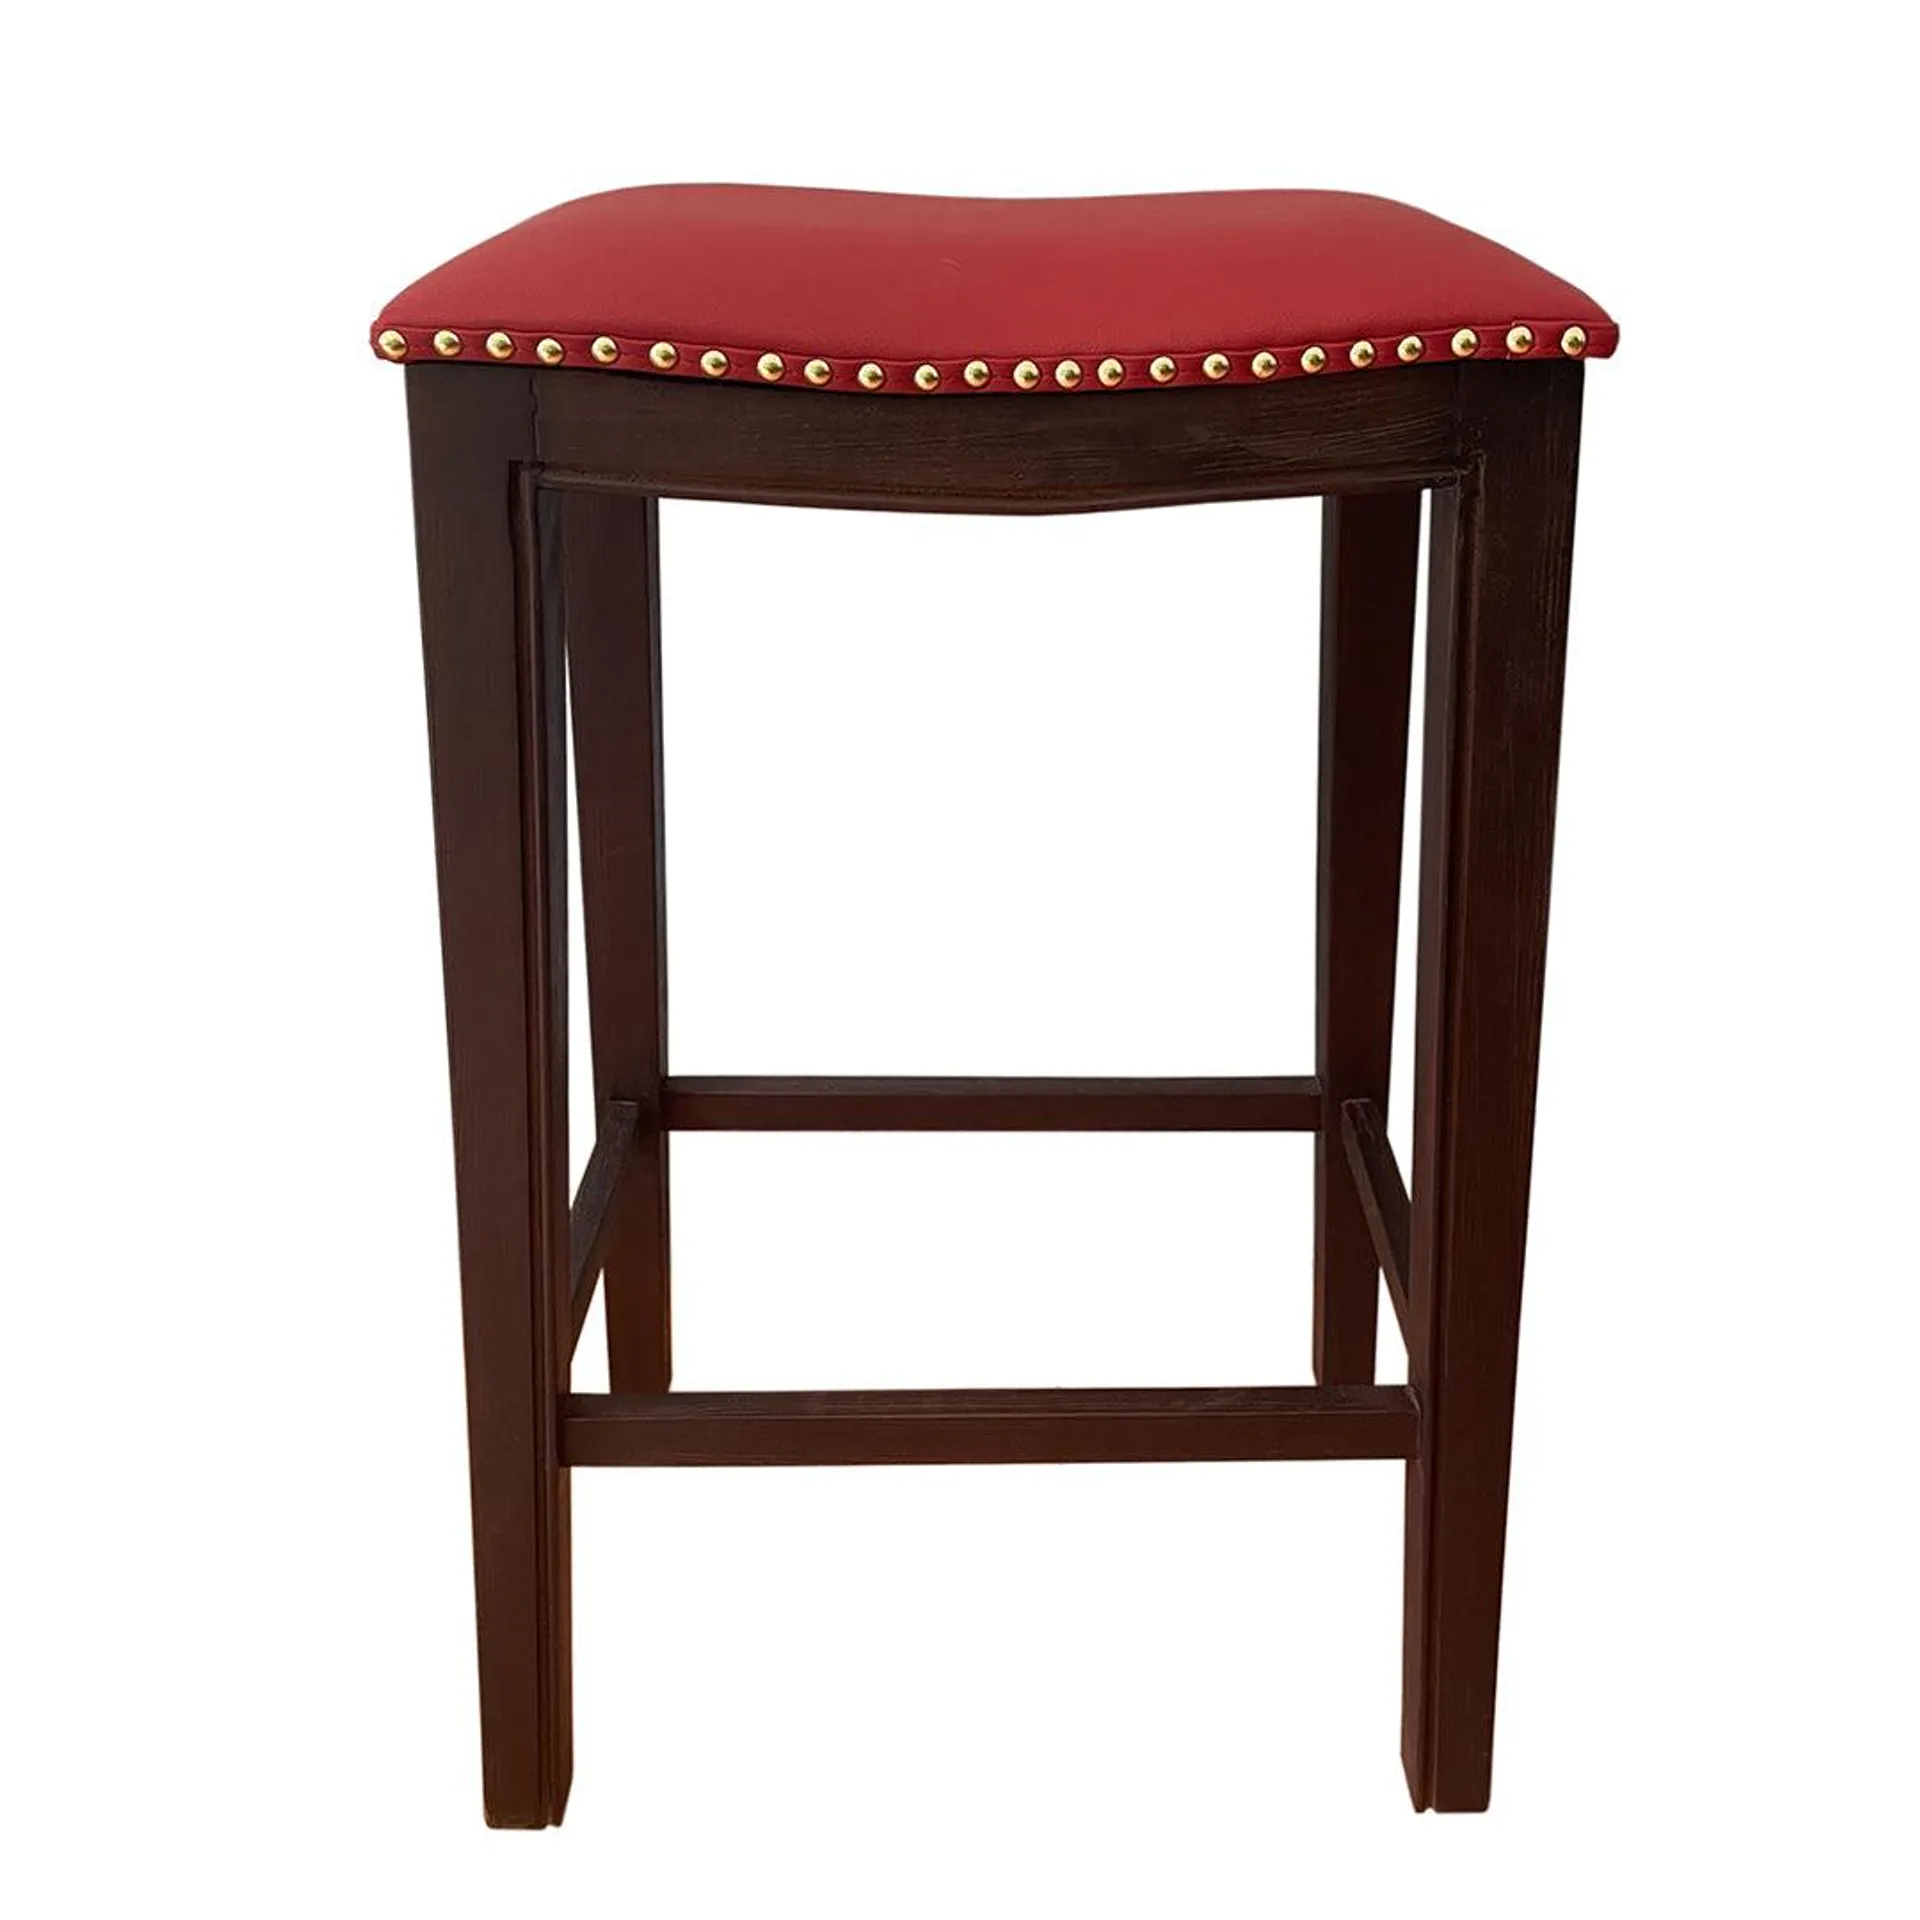 Ladd Red Stools (2 sizes)